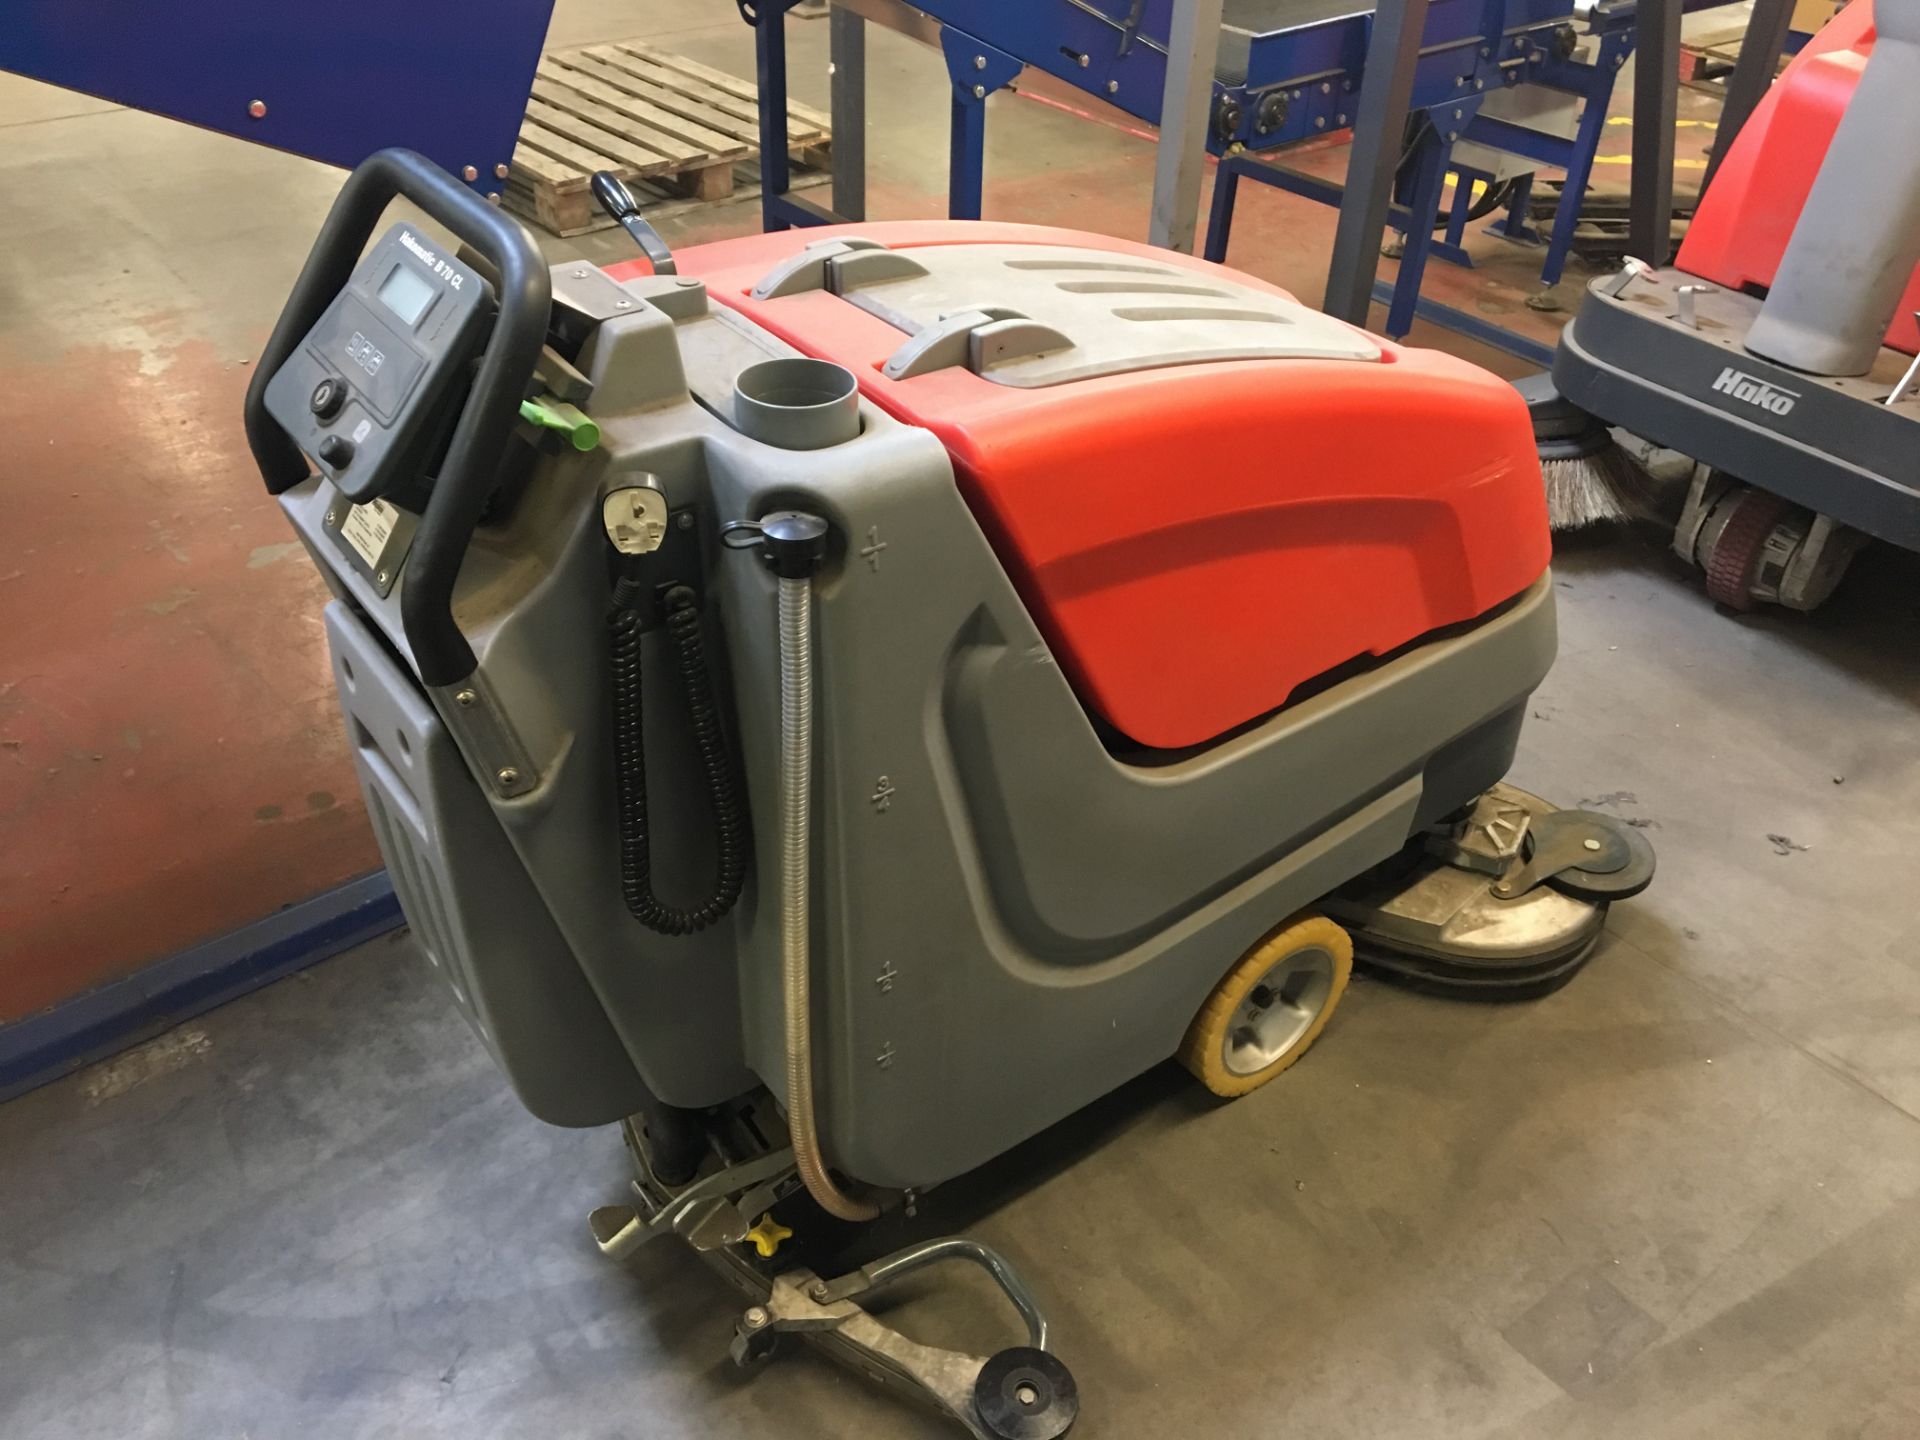 Hakomatic Scrubmaster B70 CL Hand Opertated Electric Floor Scrubber-Drier